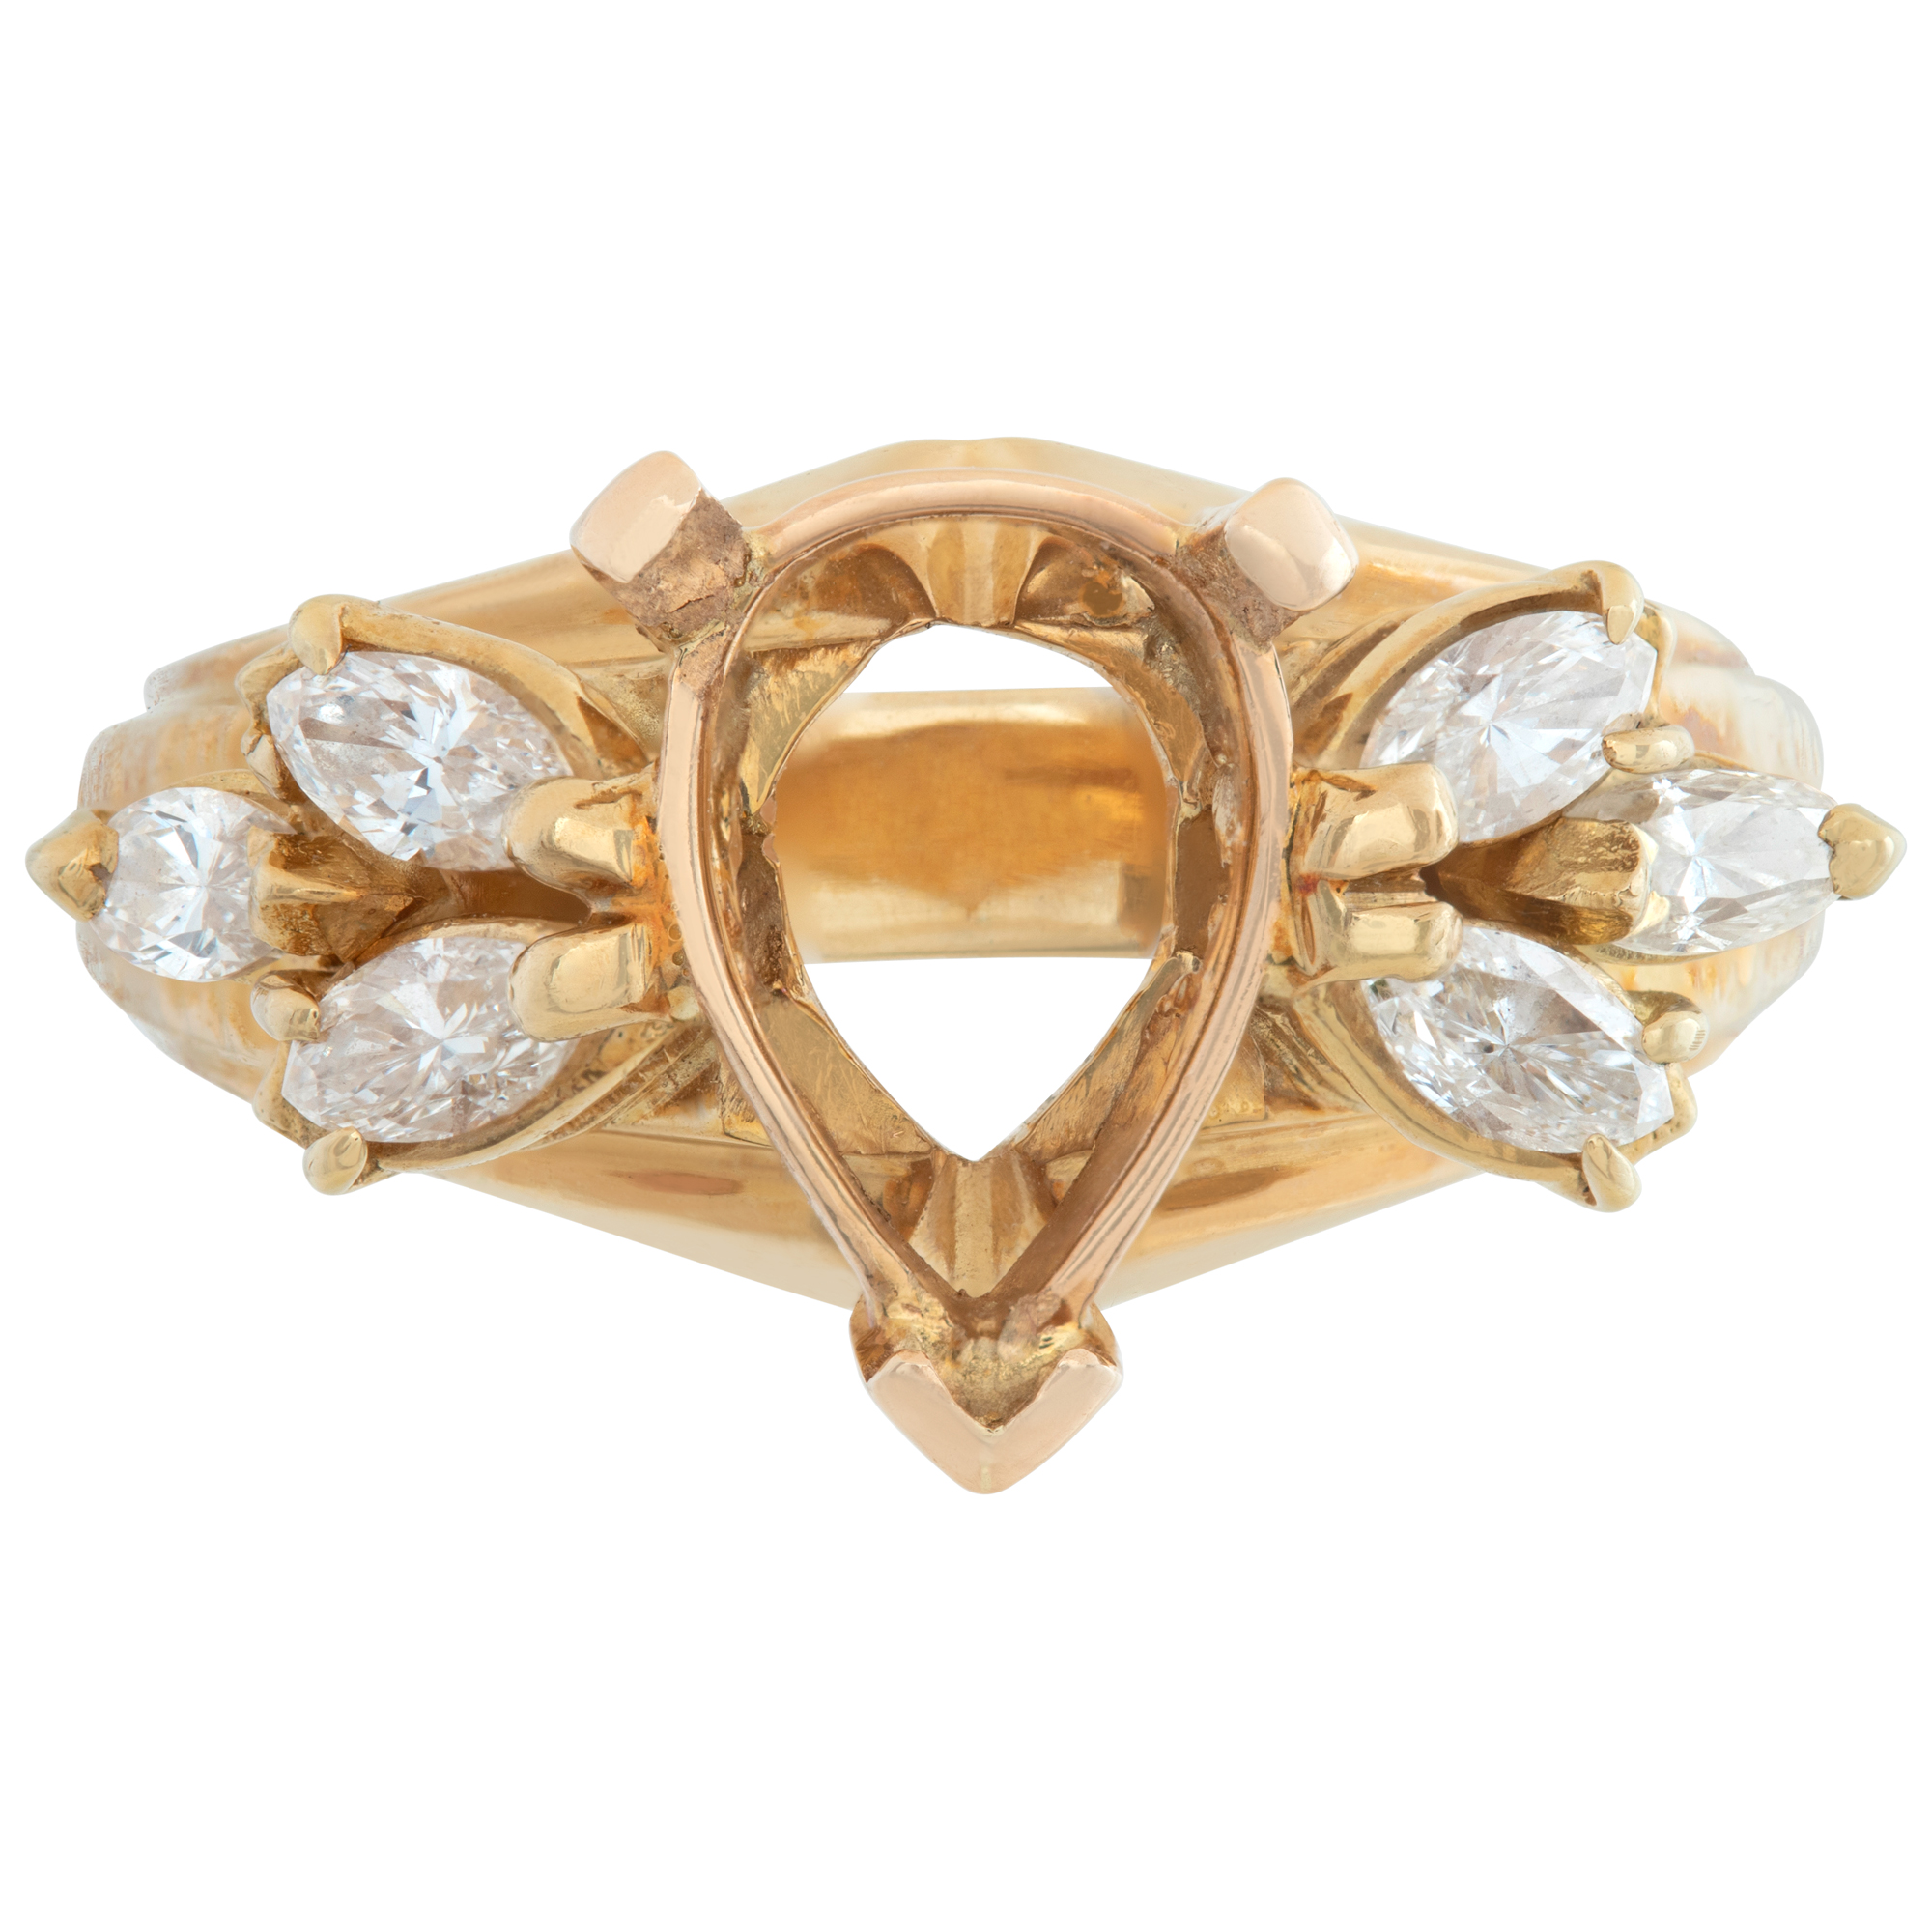 Diamond setting in 18K yellow gold, for pear shape diamond (6 x 10mm), with 6 brilliant marquise shape diamonds on sid image 2